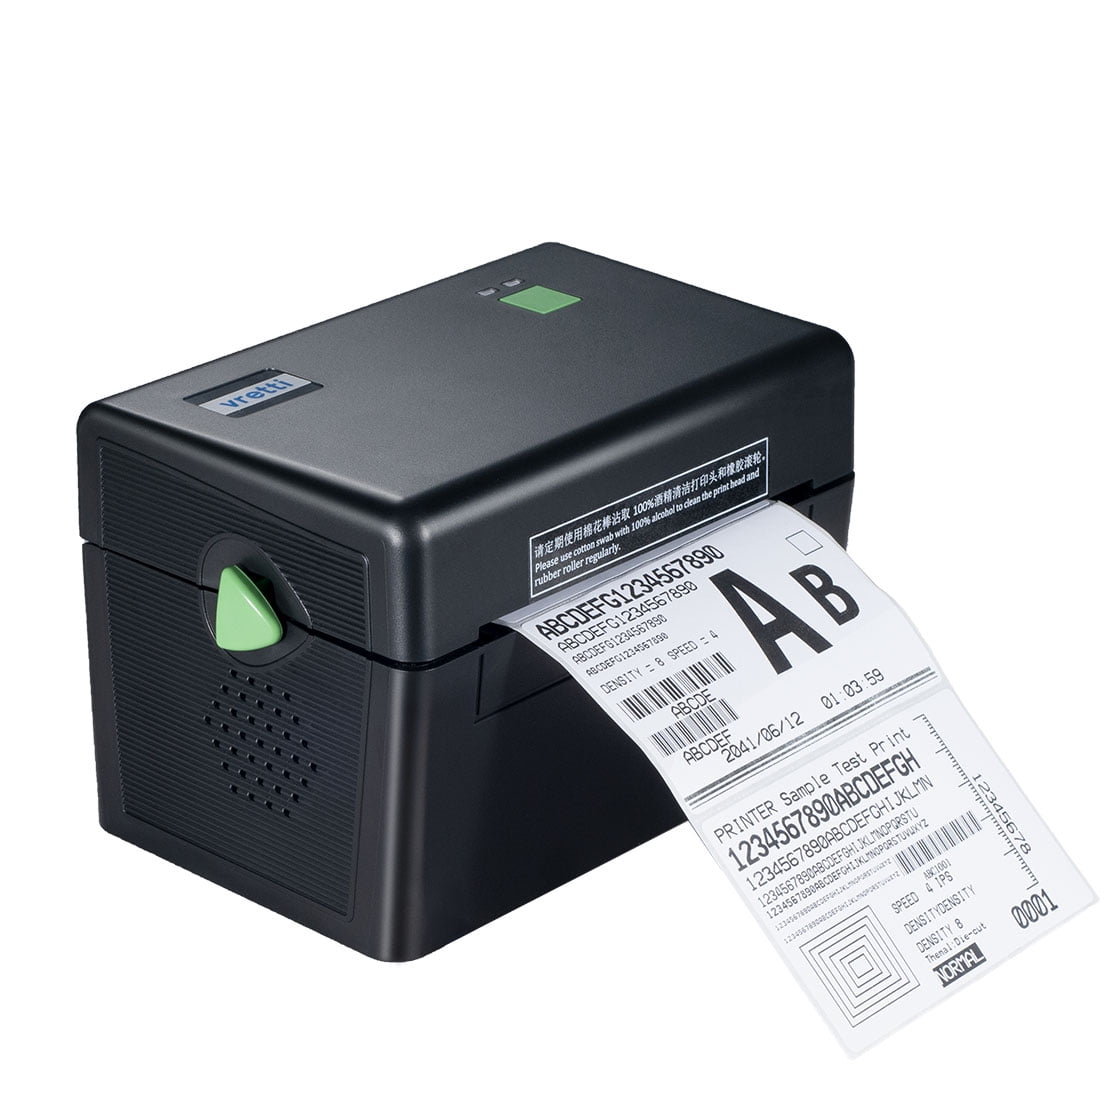 VRETTI Shipping Printer, Thermal Label Printer 4x6 Compatible with Windows,Mac,Linux, Desktop Barcode Printers Machine Shipping Packages,Small Business, UPS, FedEx. - Walmart.com